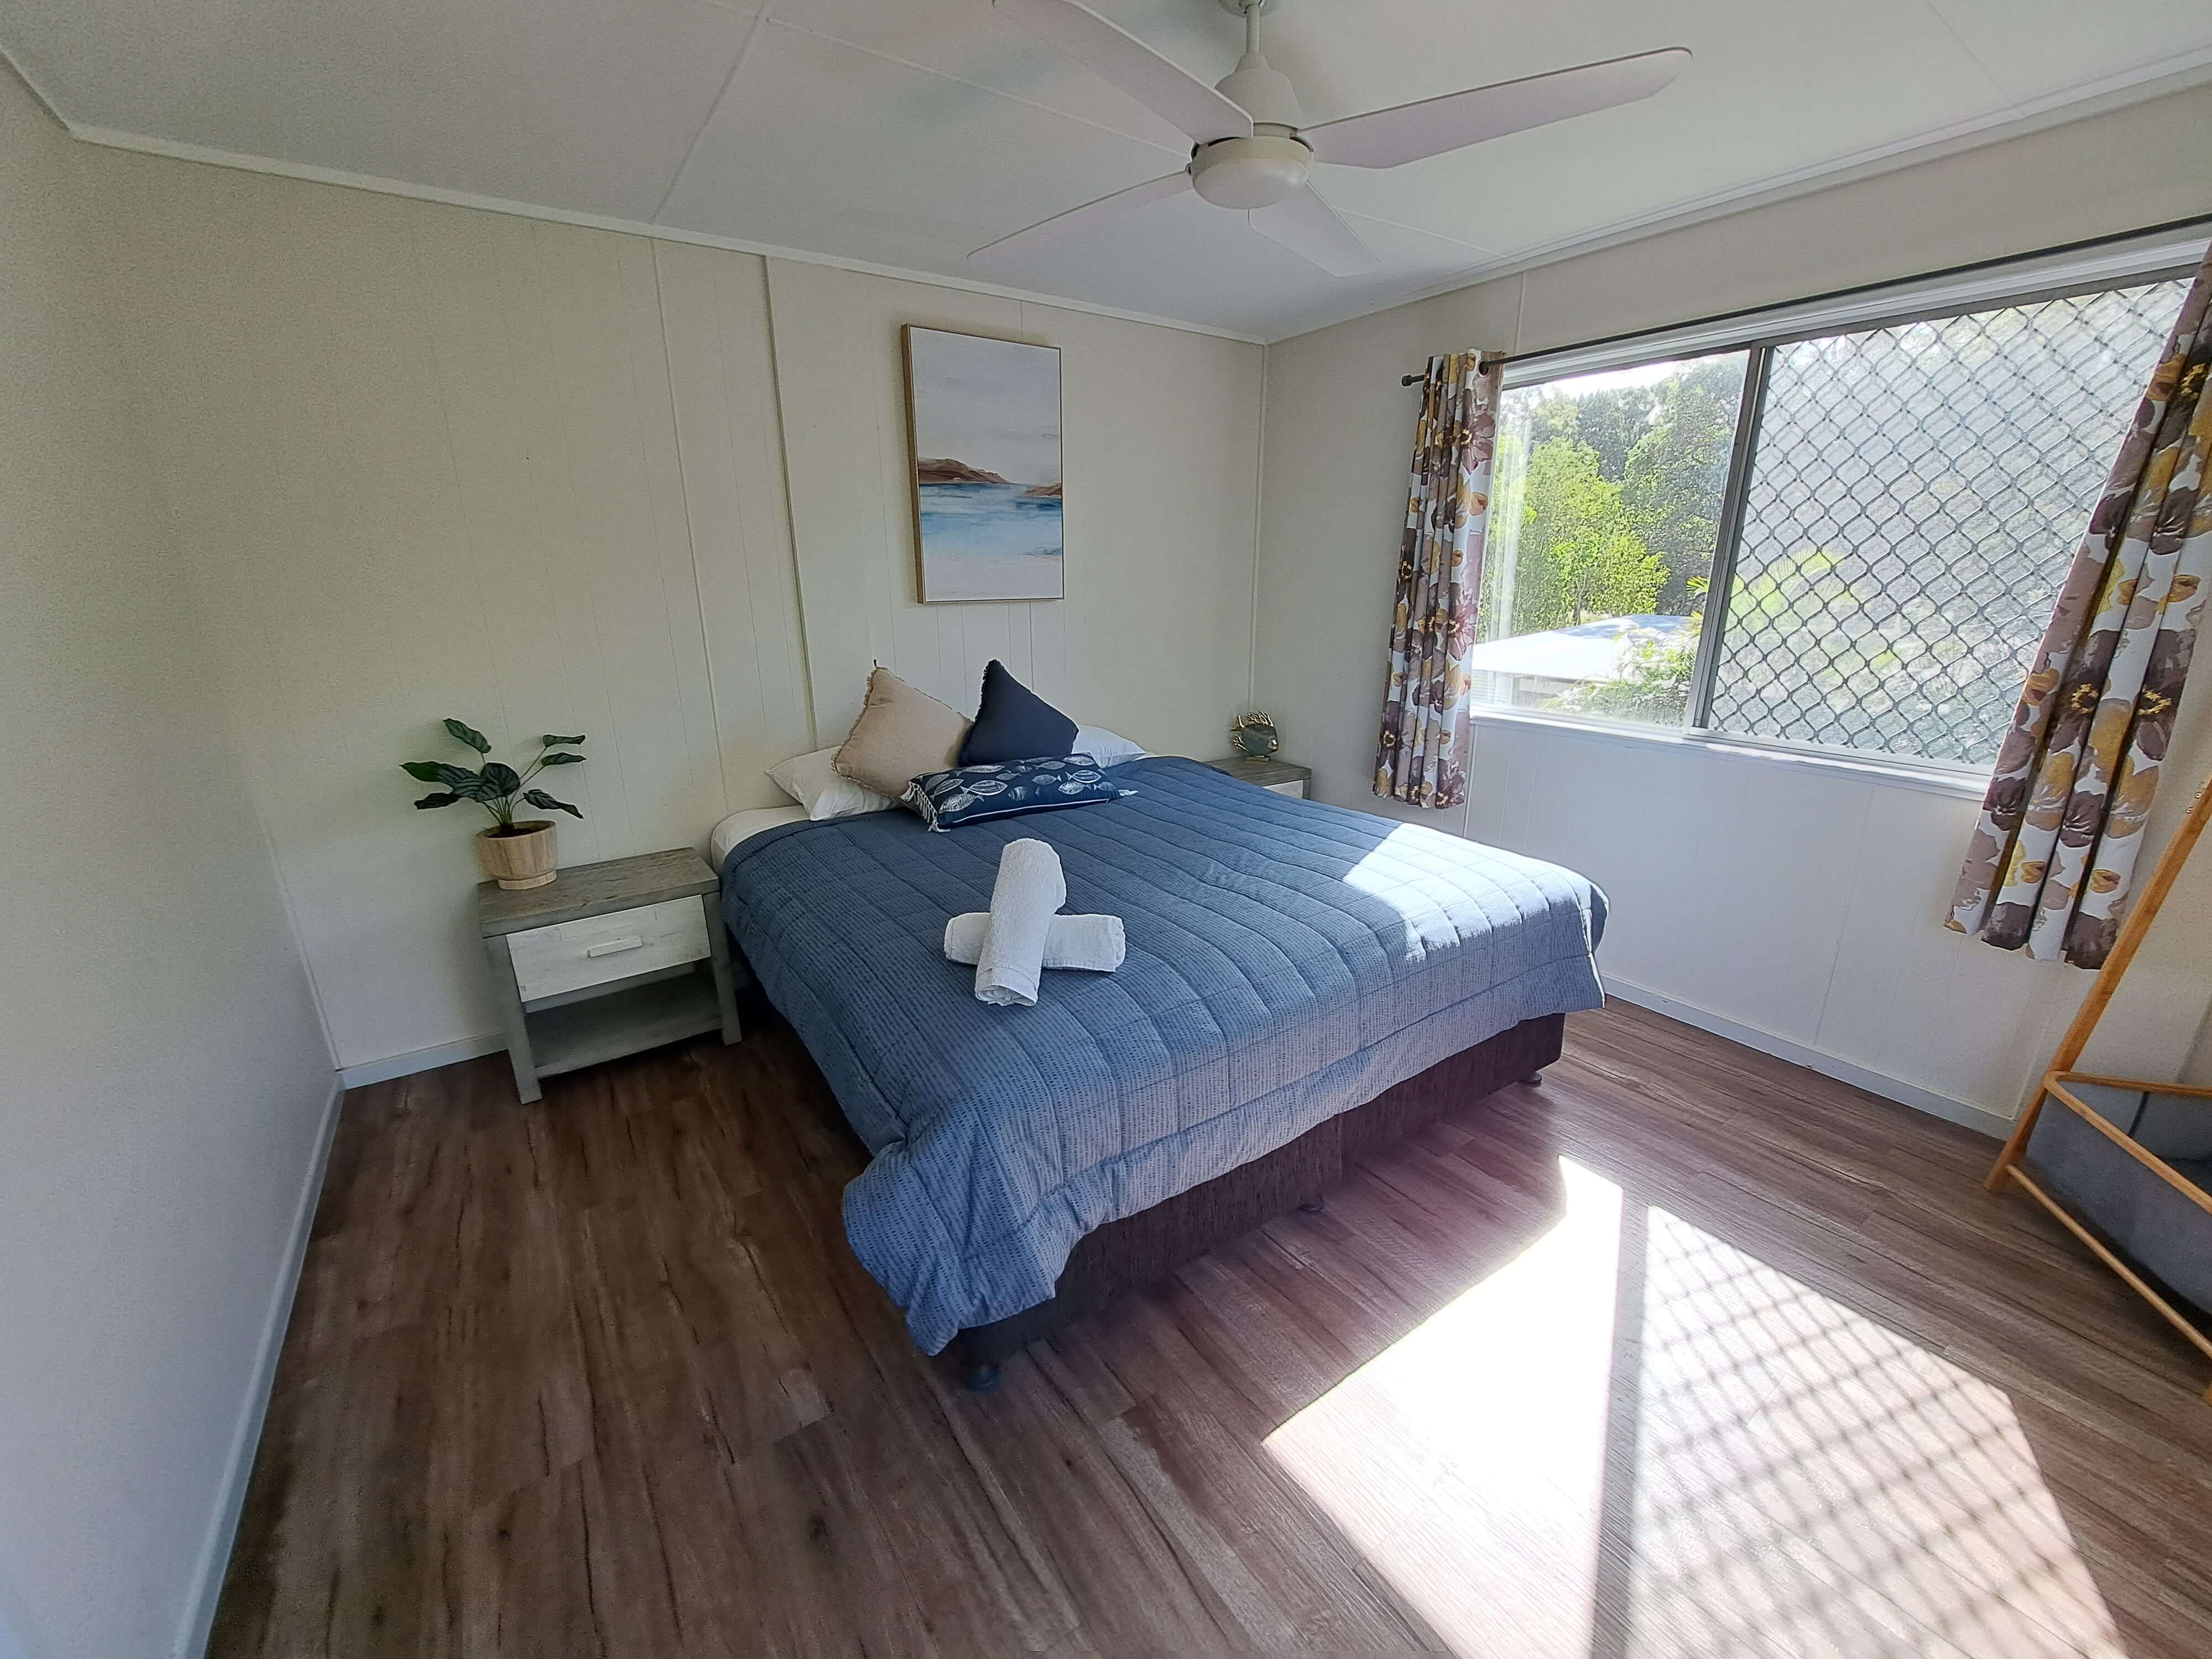 Bedroom of our Holiday Homes at Castaways Unit 6